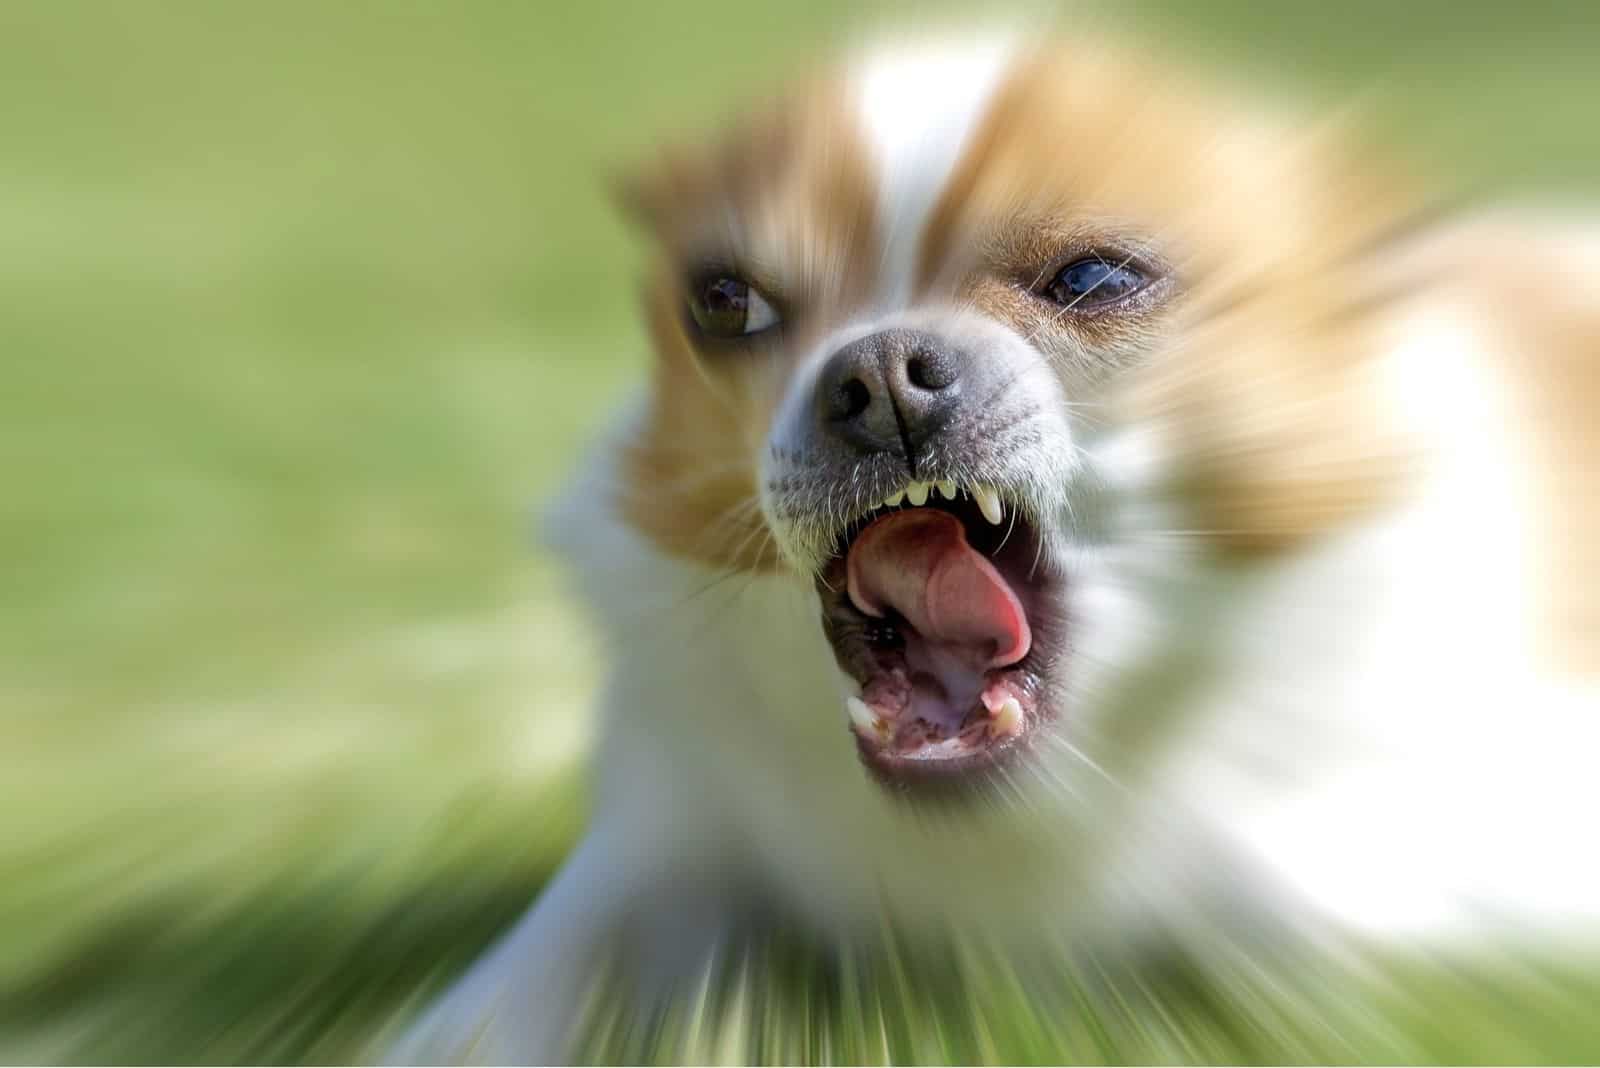 extremely aggressive chihuahua dog angry and ready to bite